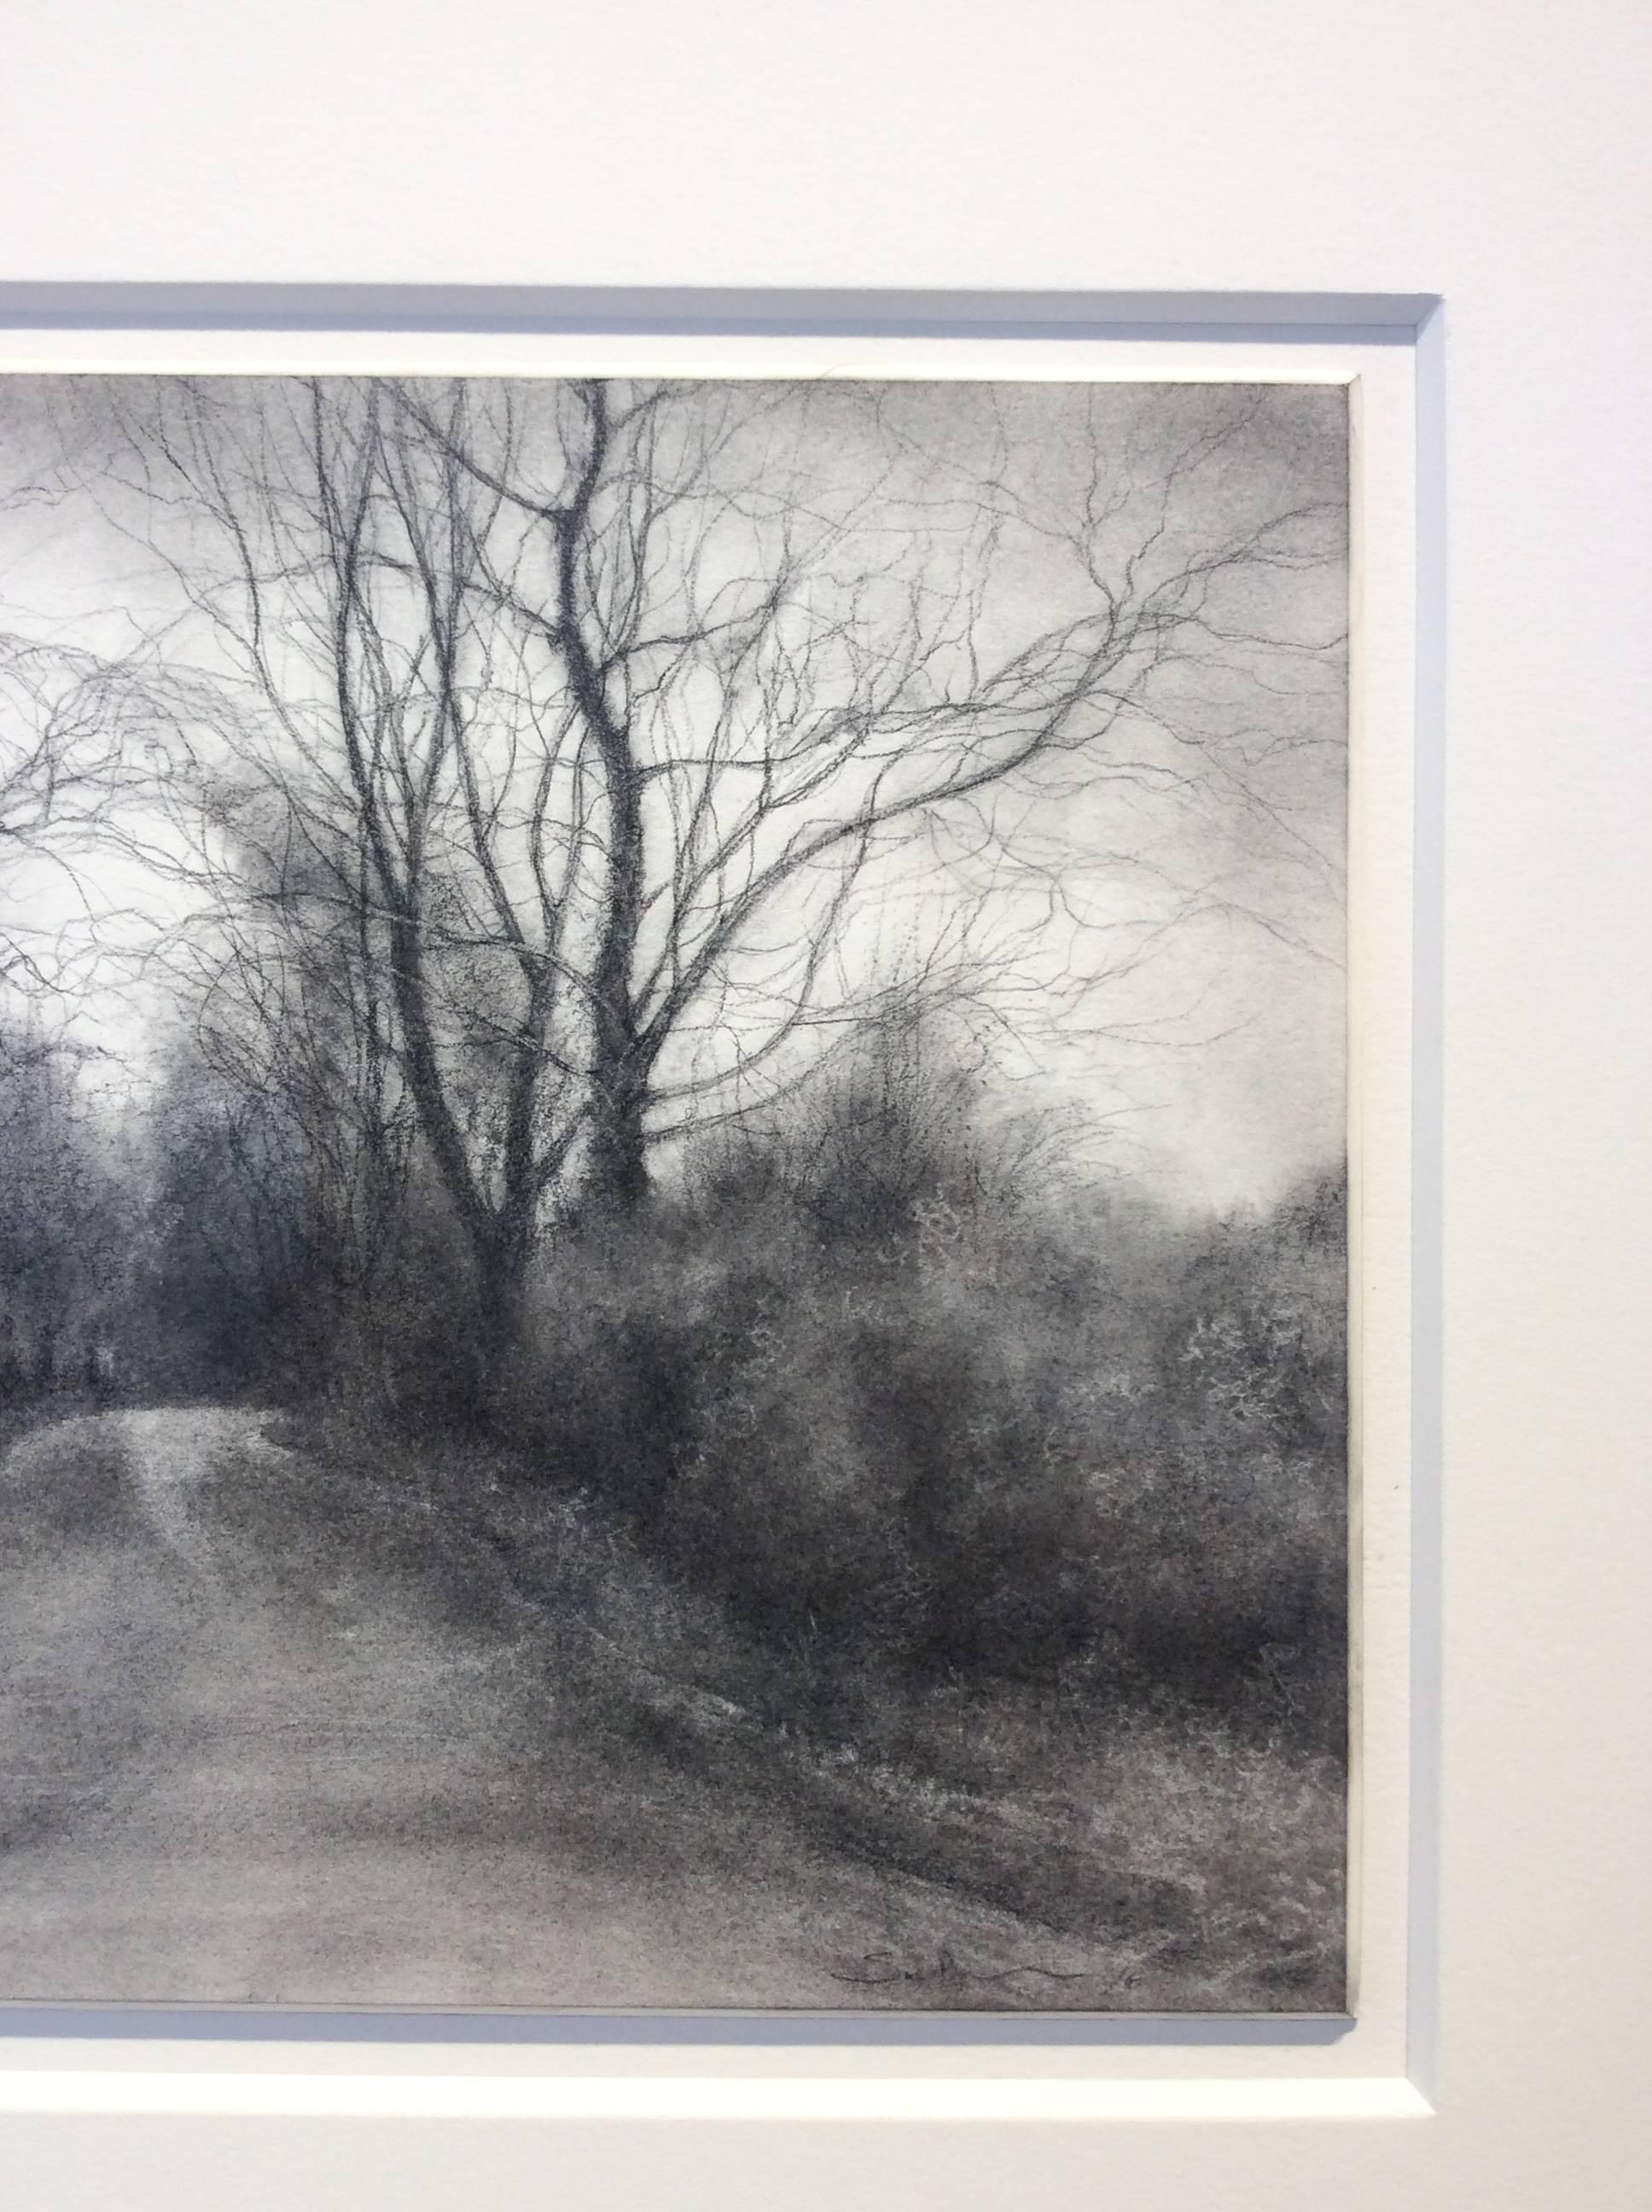 Rural Road 7 (Realistic Black & White Charcoal Drawing of Country Road & Trees) - Gray Landscape Art by Sue Bryan